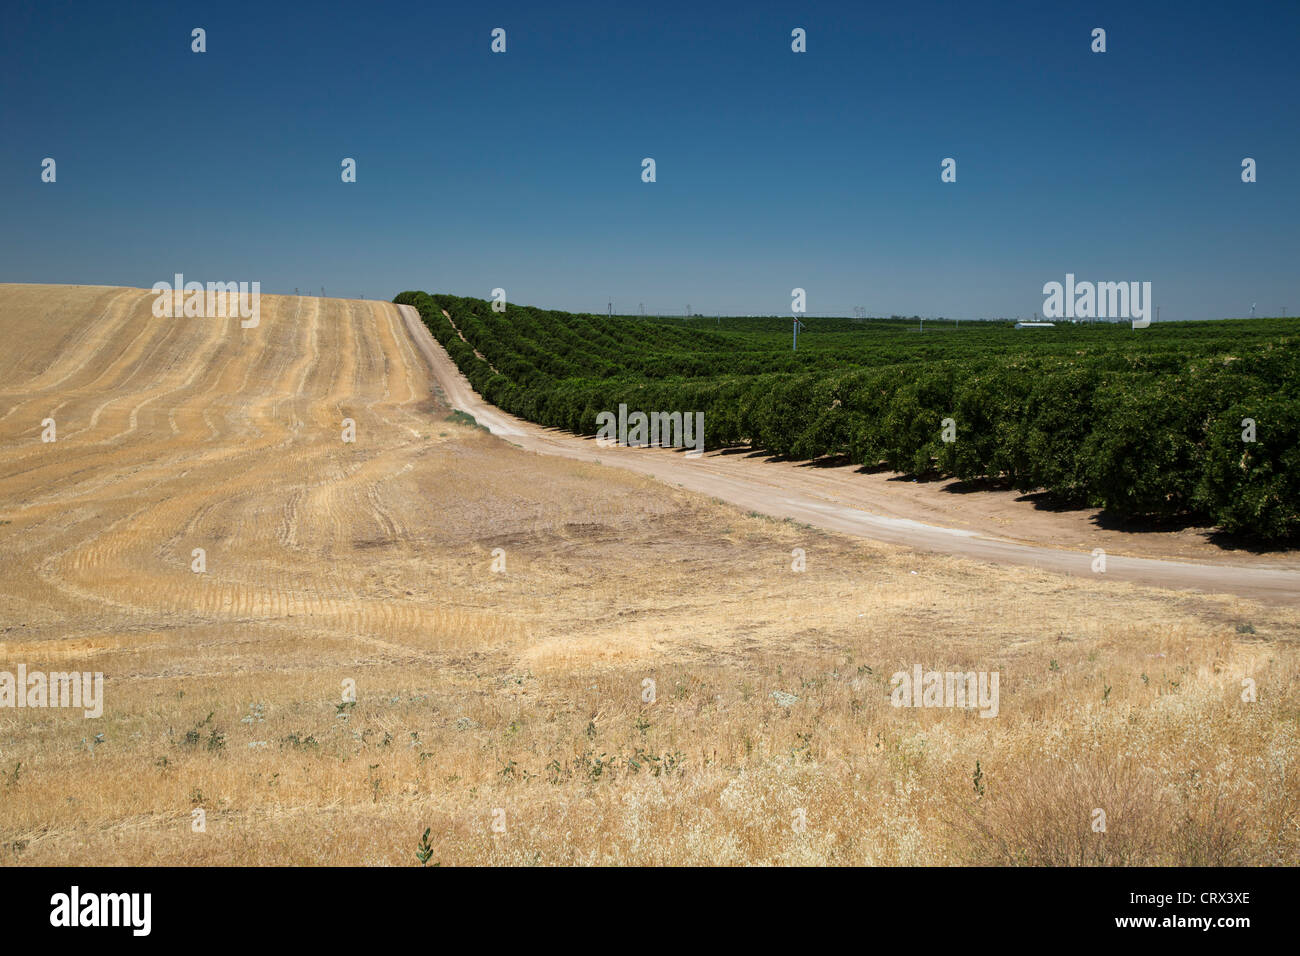 Richgrove, California - An irrigated orchard next to a non-irrigated hay field in the San Joaquin Valley. Stock Photo